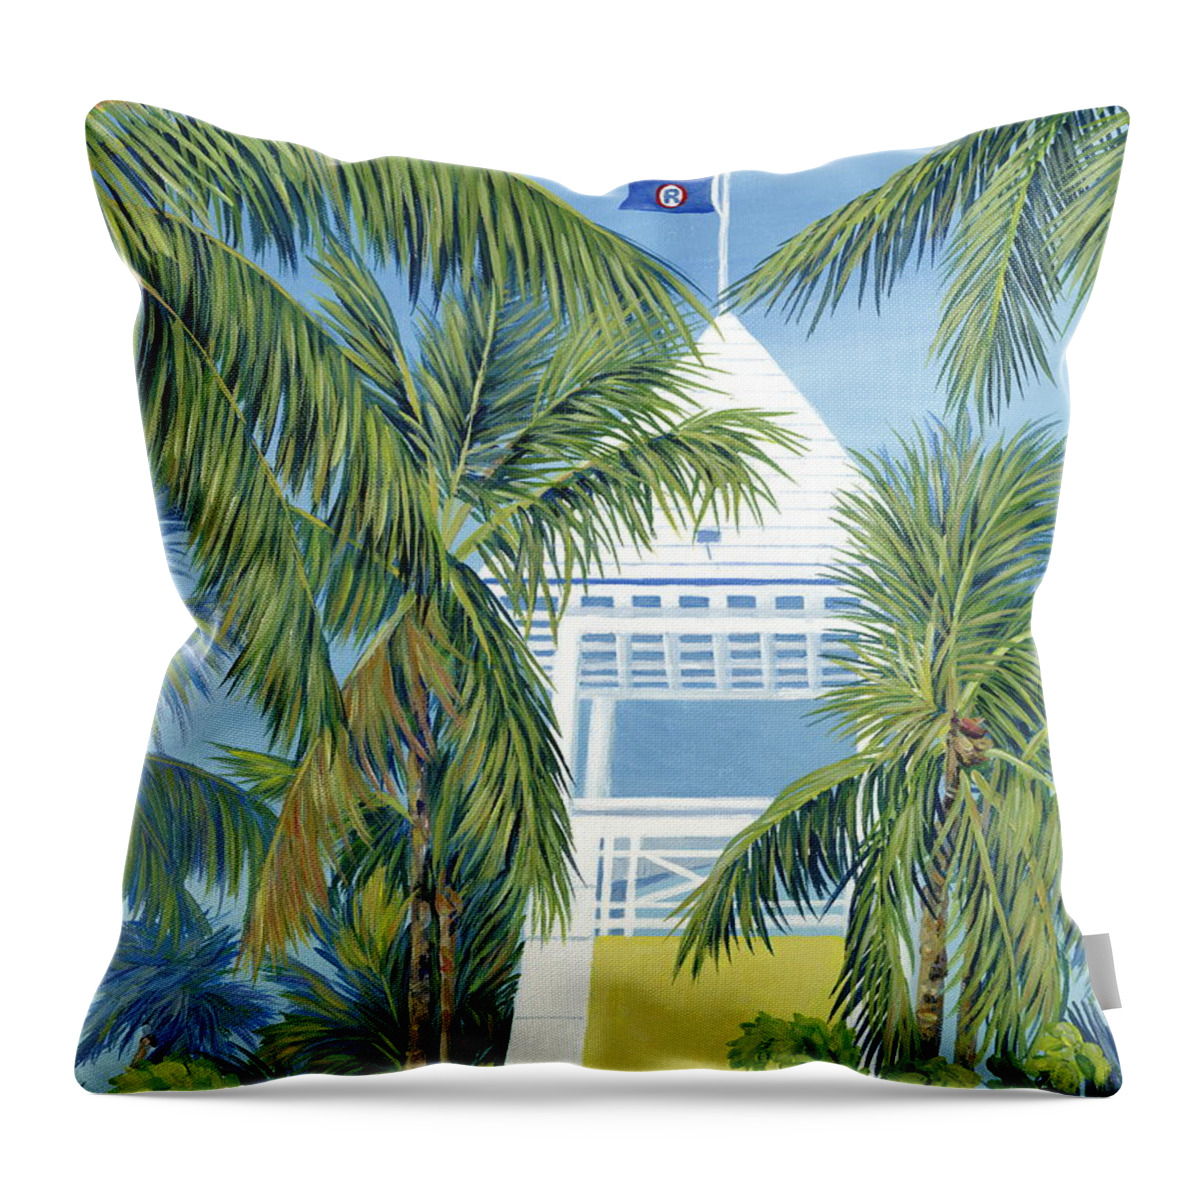 Ocean Reef Club Throw Pillow featuring the painting Ocean Reef Club by Danielle Perry